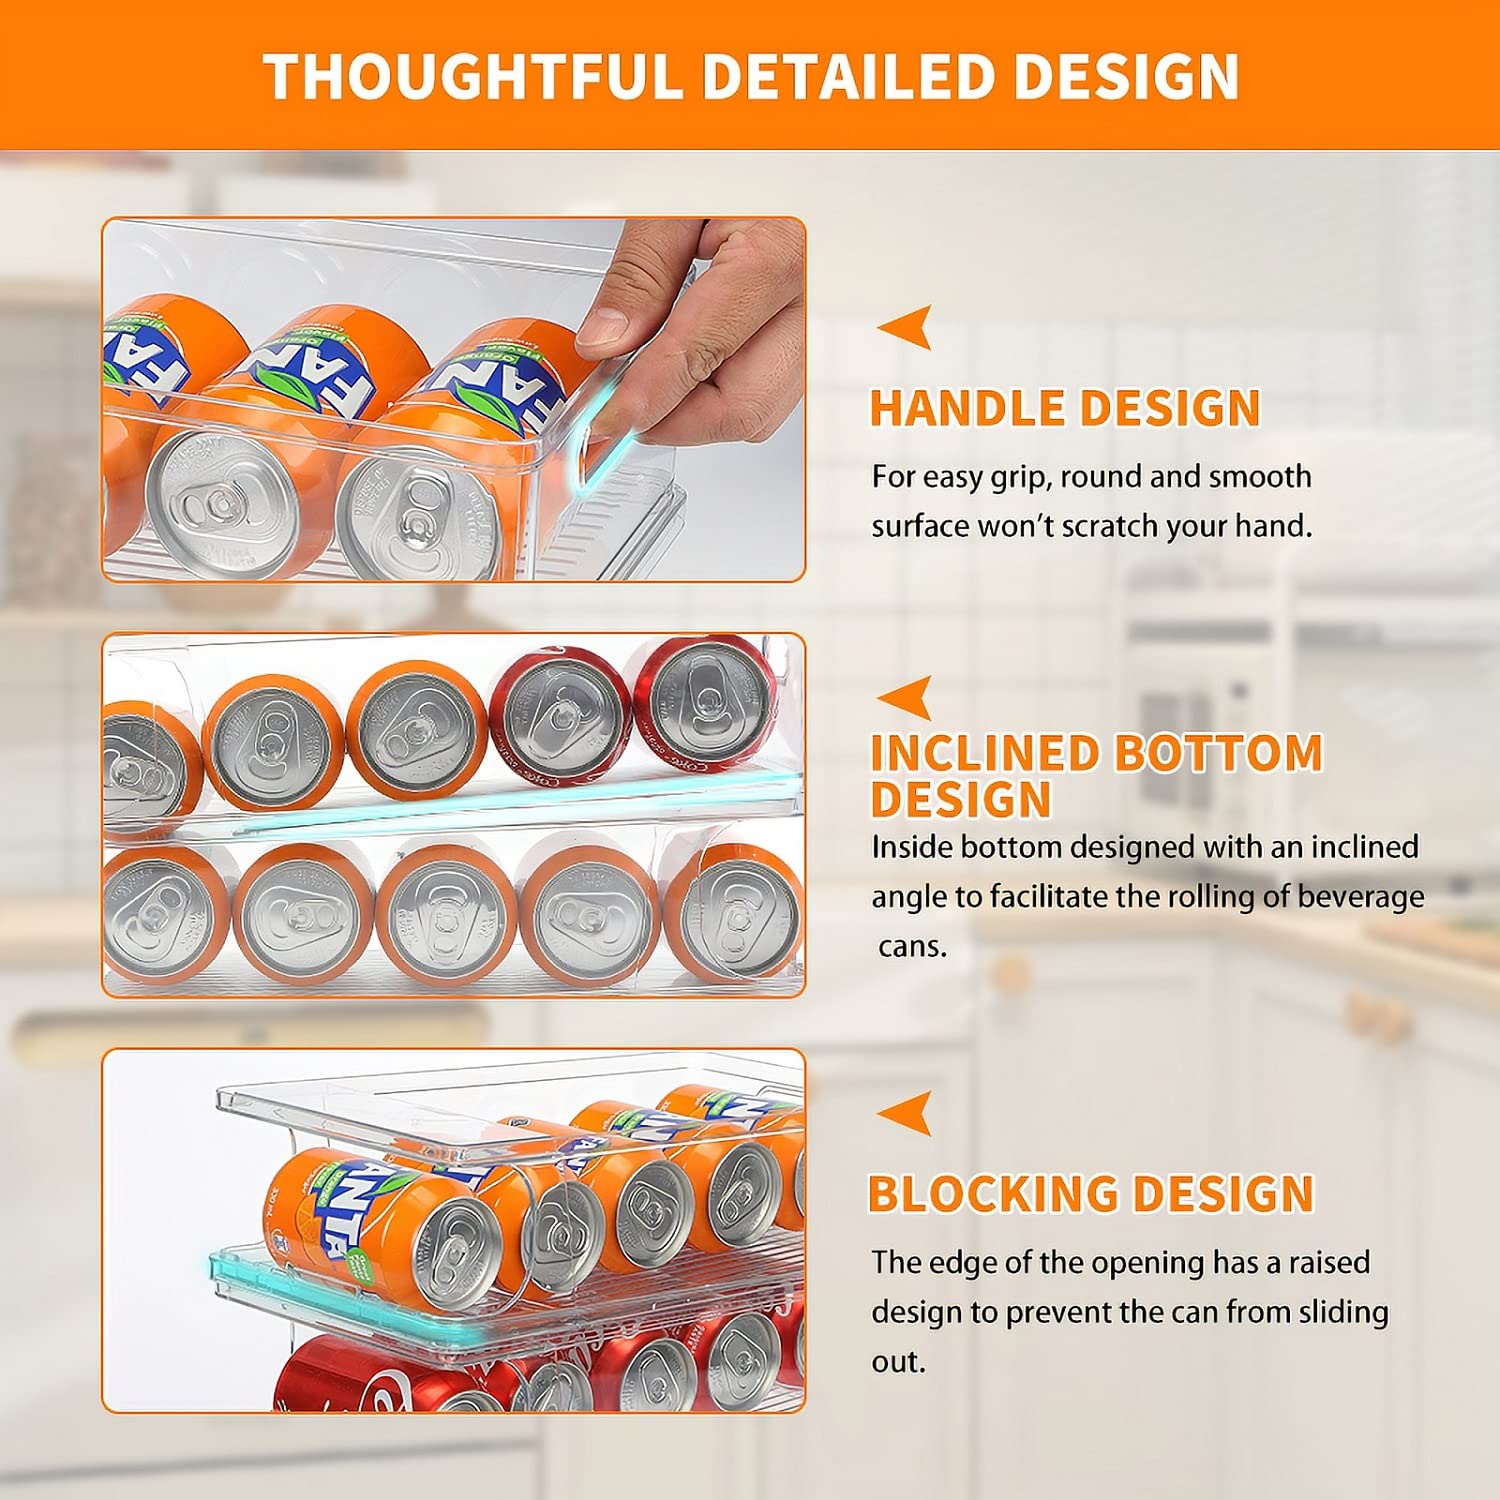 2 Layers Soda Can Organizers Stackable Auto Roll Off Drink Organizer For Fridge Organizer And Storage Soda Can Dispenser For Refrigerator Organizer Bins Can Holder Pantry Storage Beverage Holder